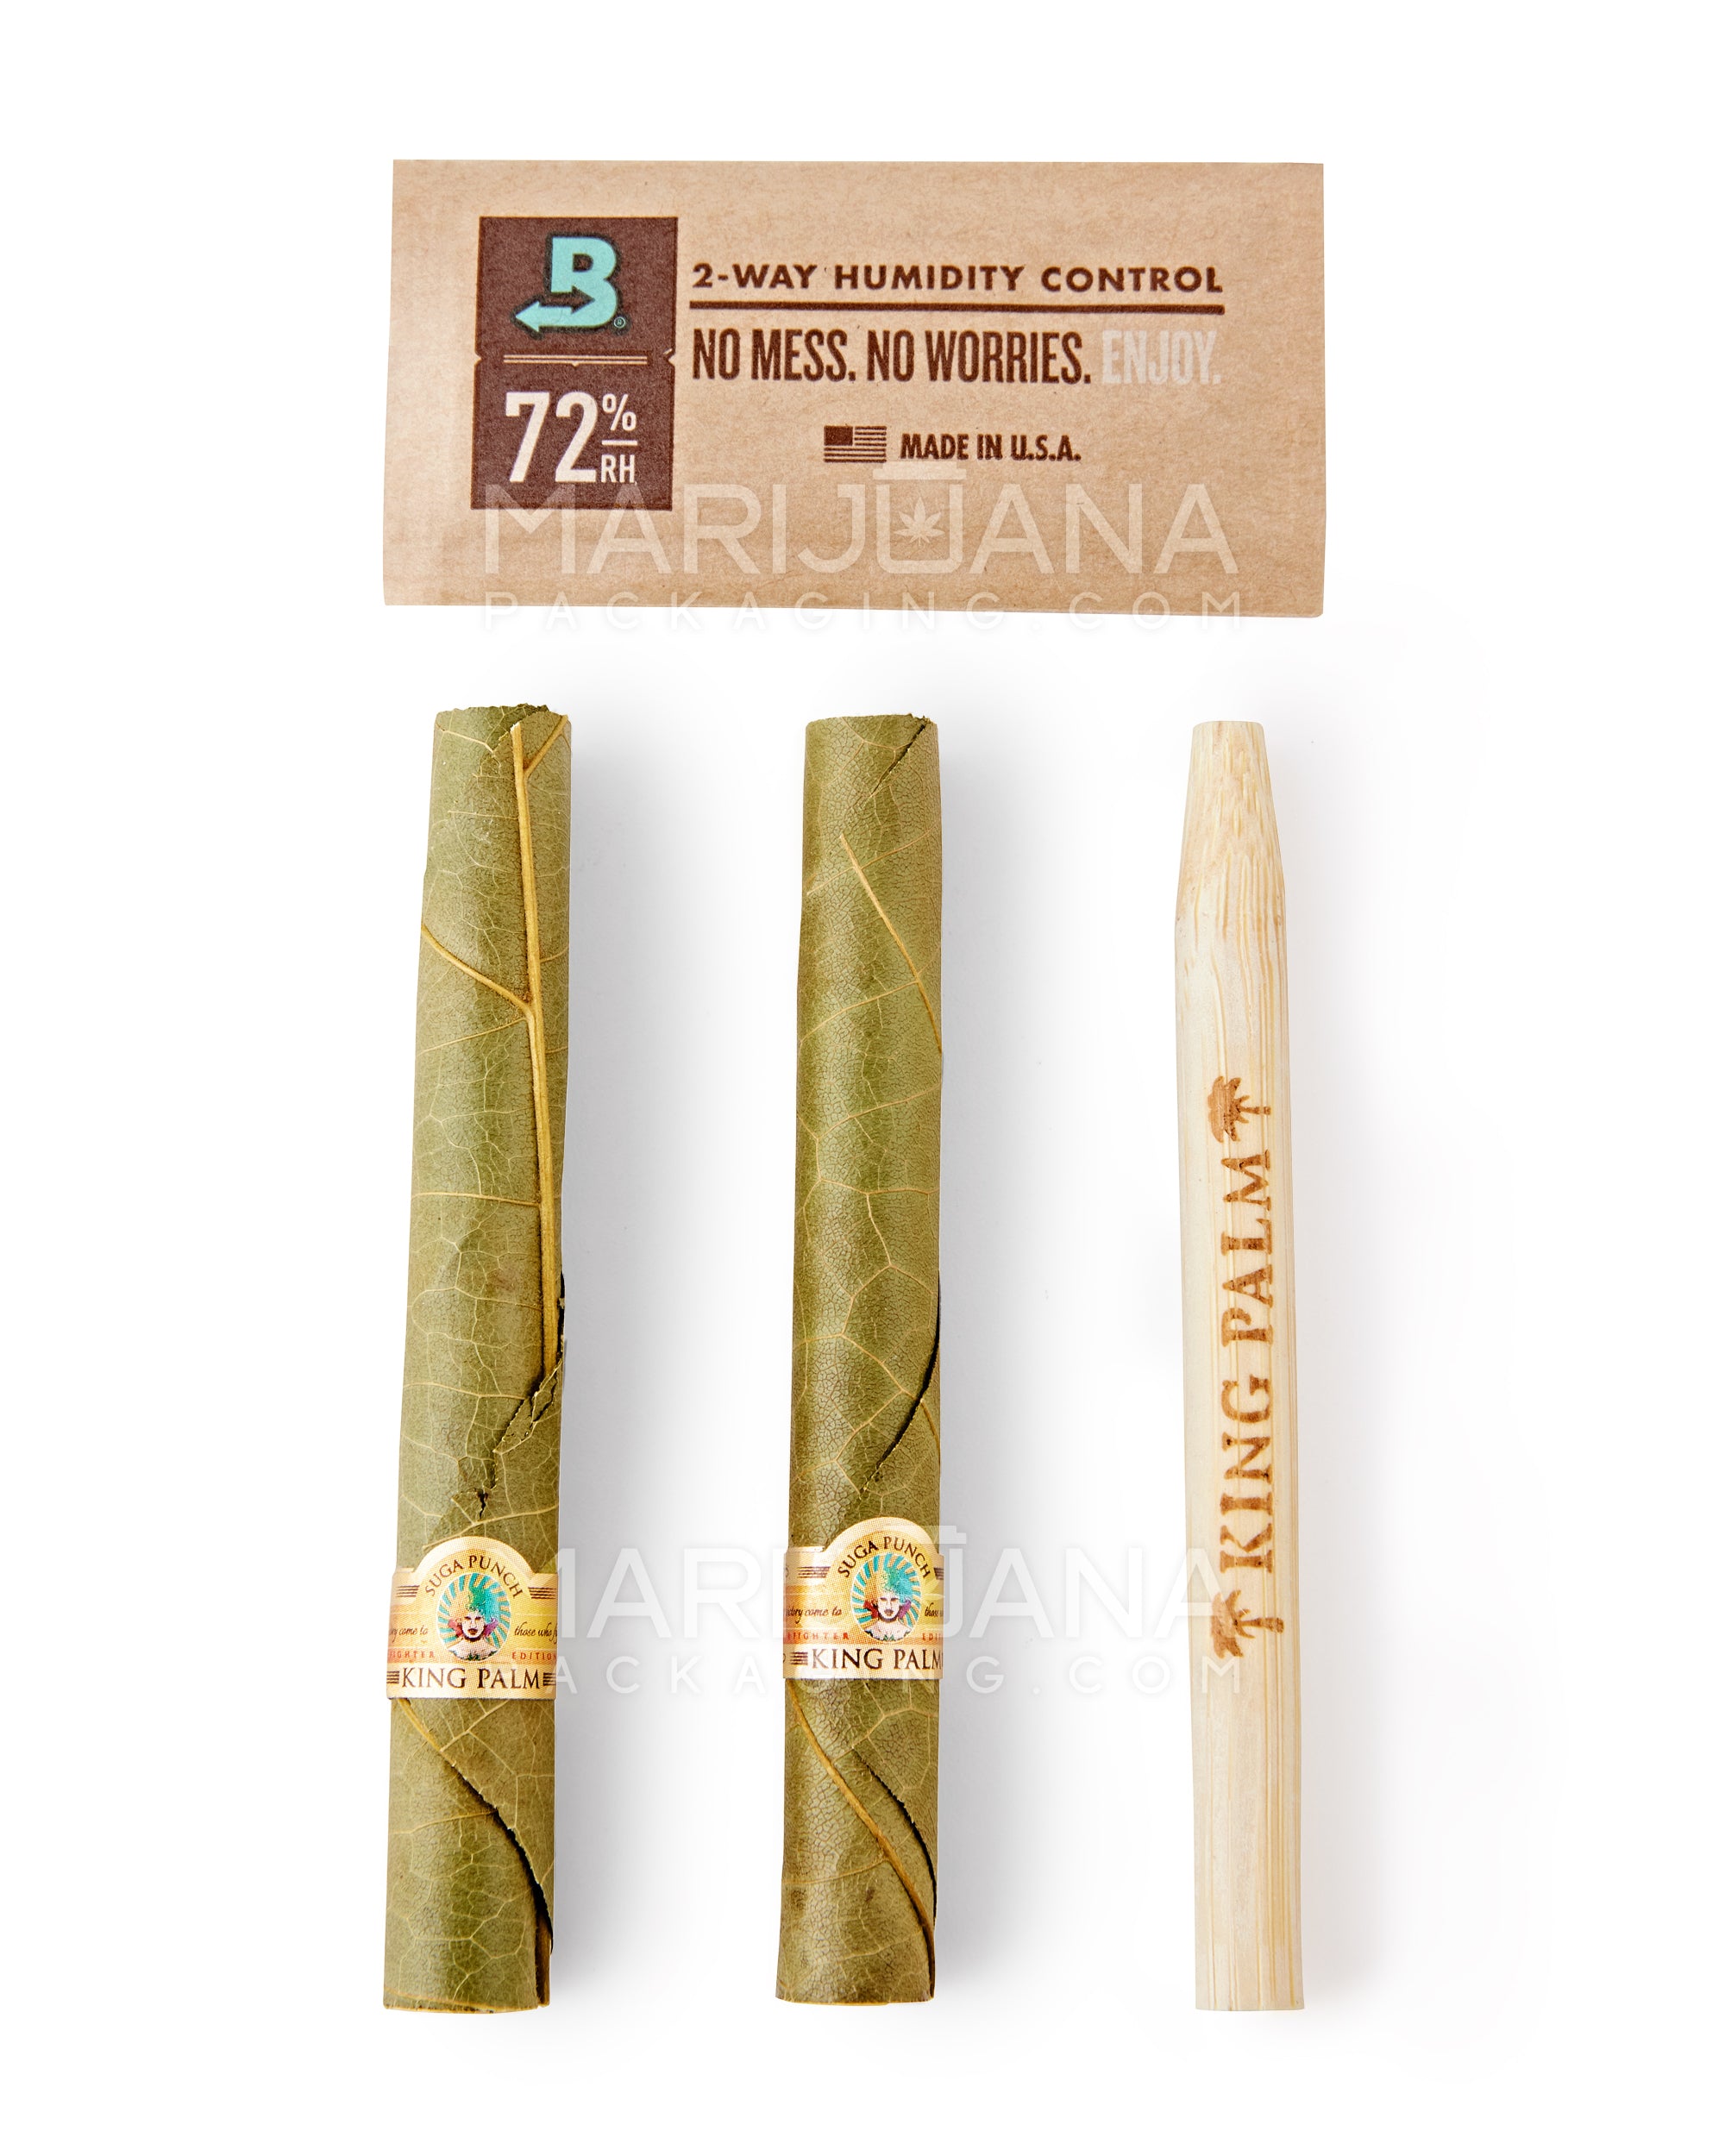 KING PALM | 'Retail Display' Mini Green Natural Leaf Blunt Wraps | 84mm - Suga Punch - 20 Count